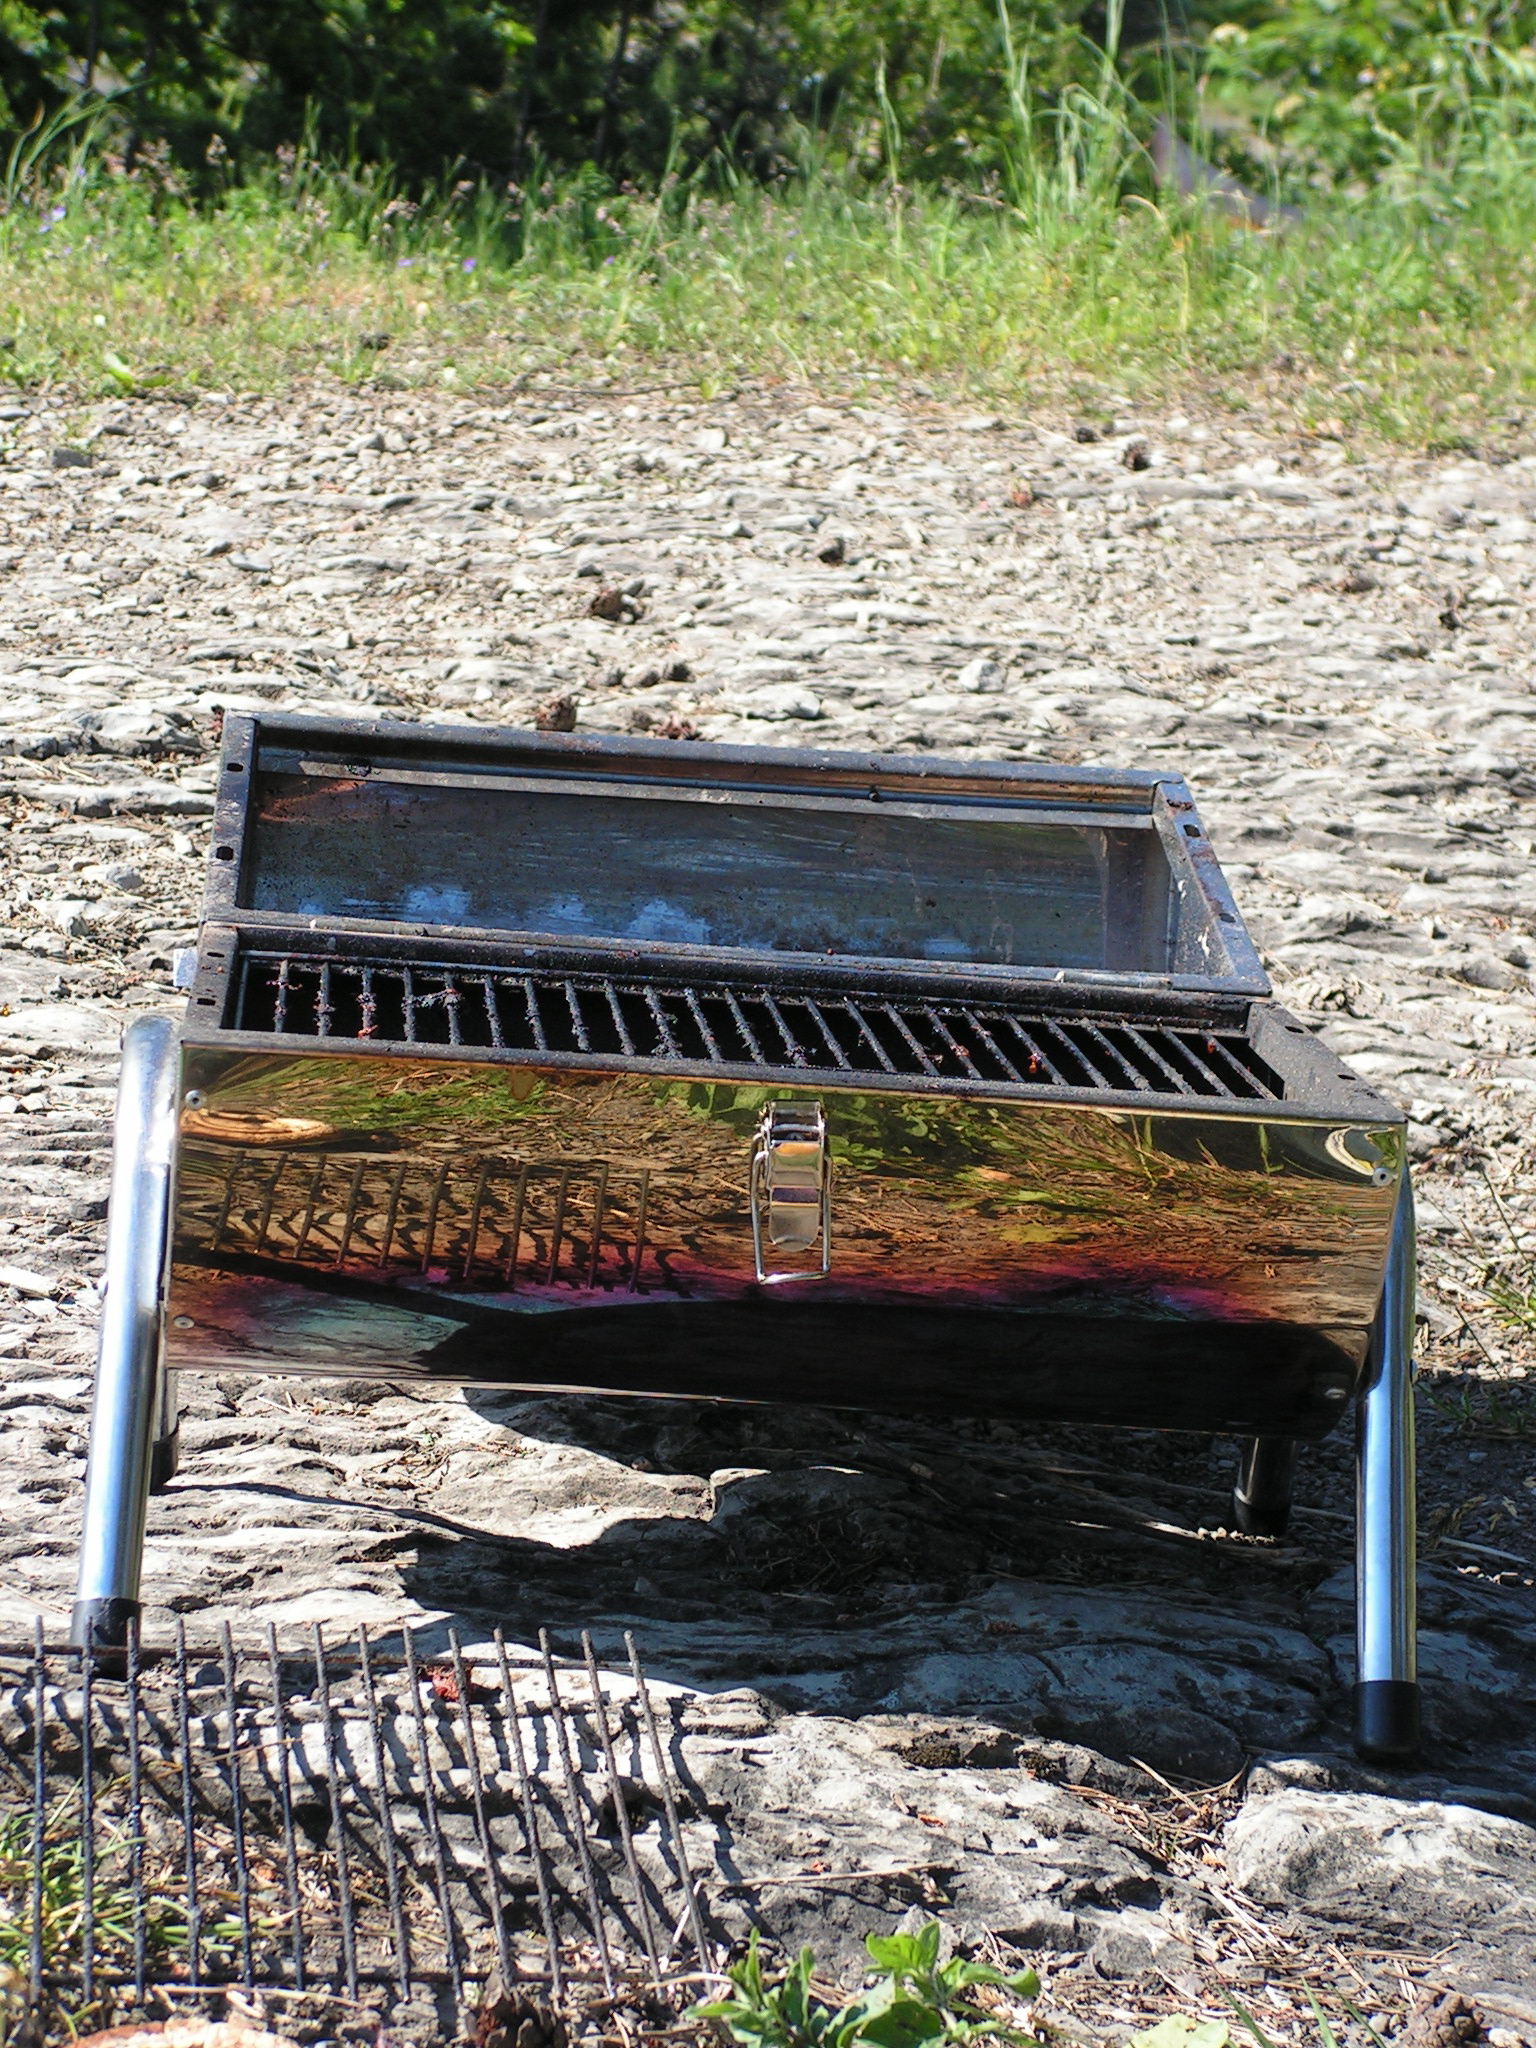 the grill is in dirt near a wooded area